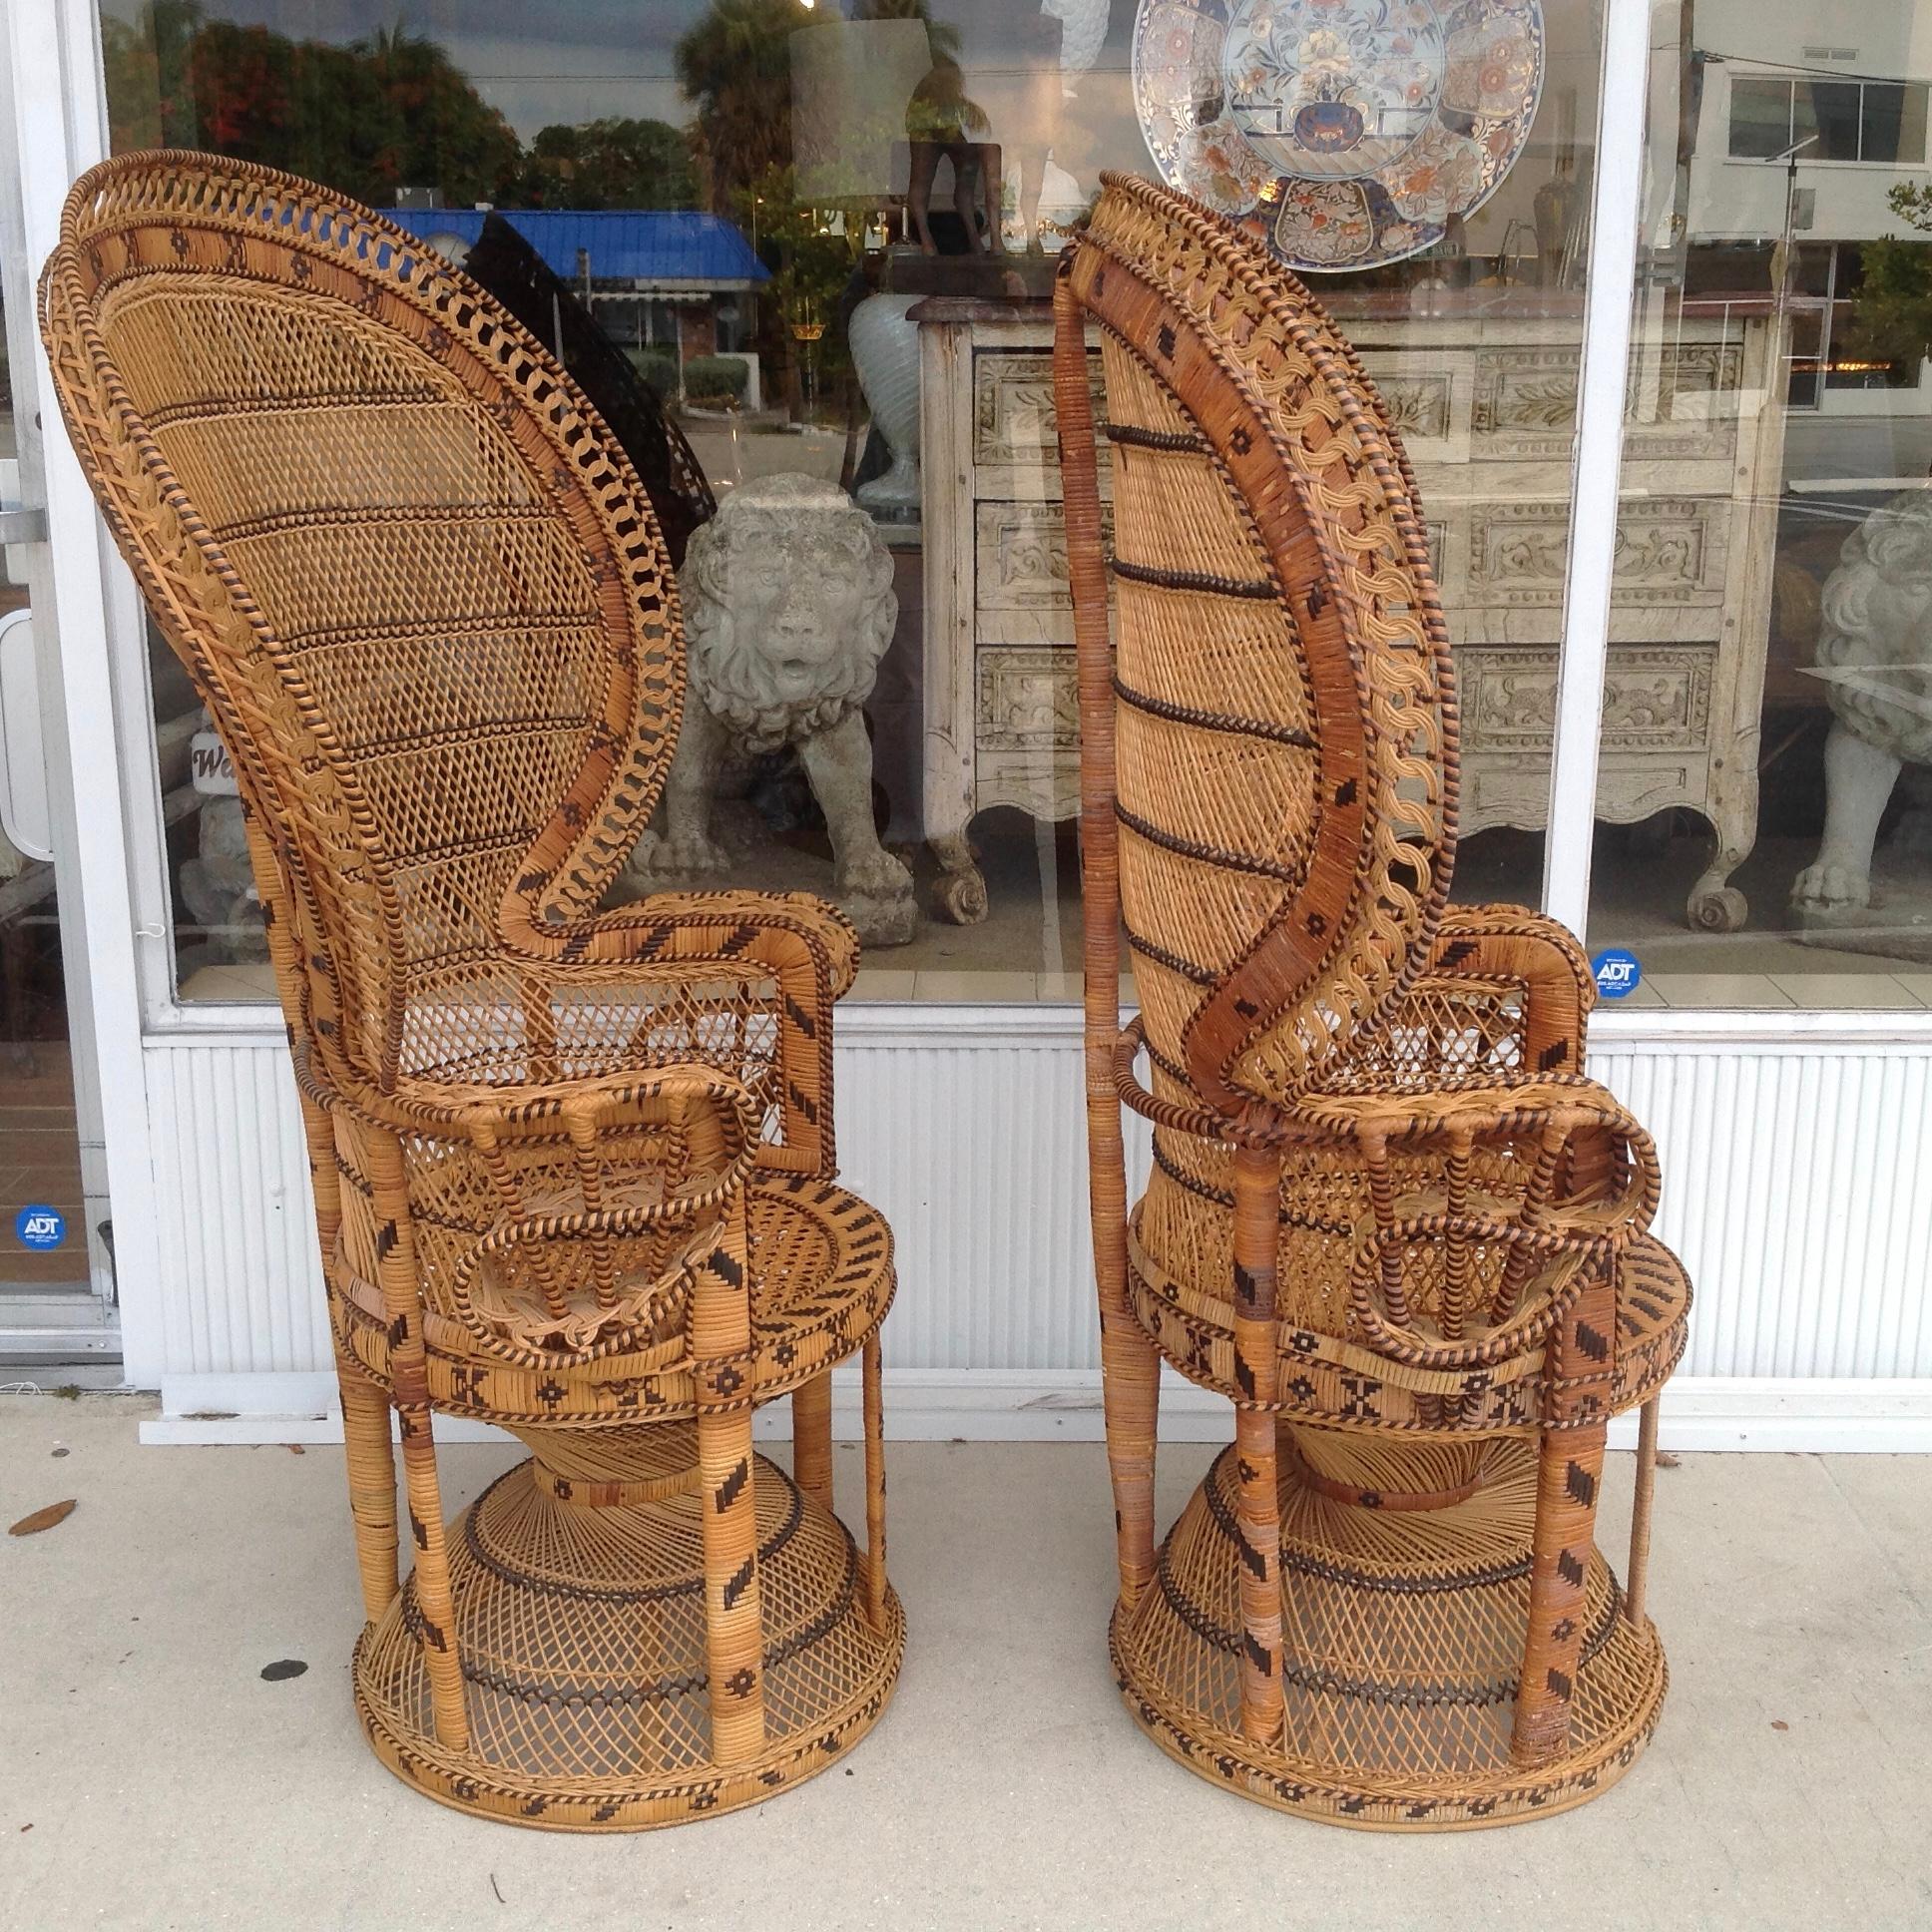 20th Century Pair of Decorated Woven Rattan Peacock Chairs